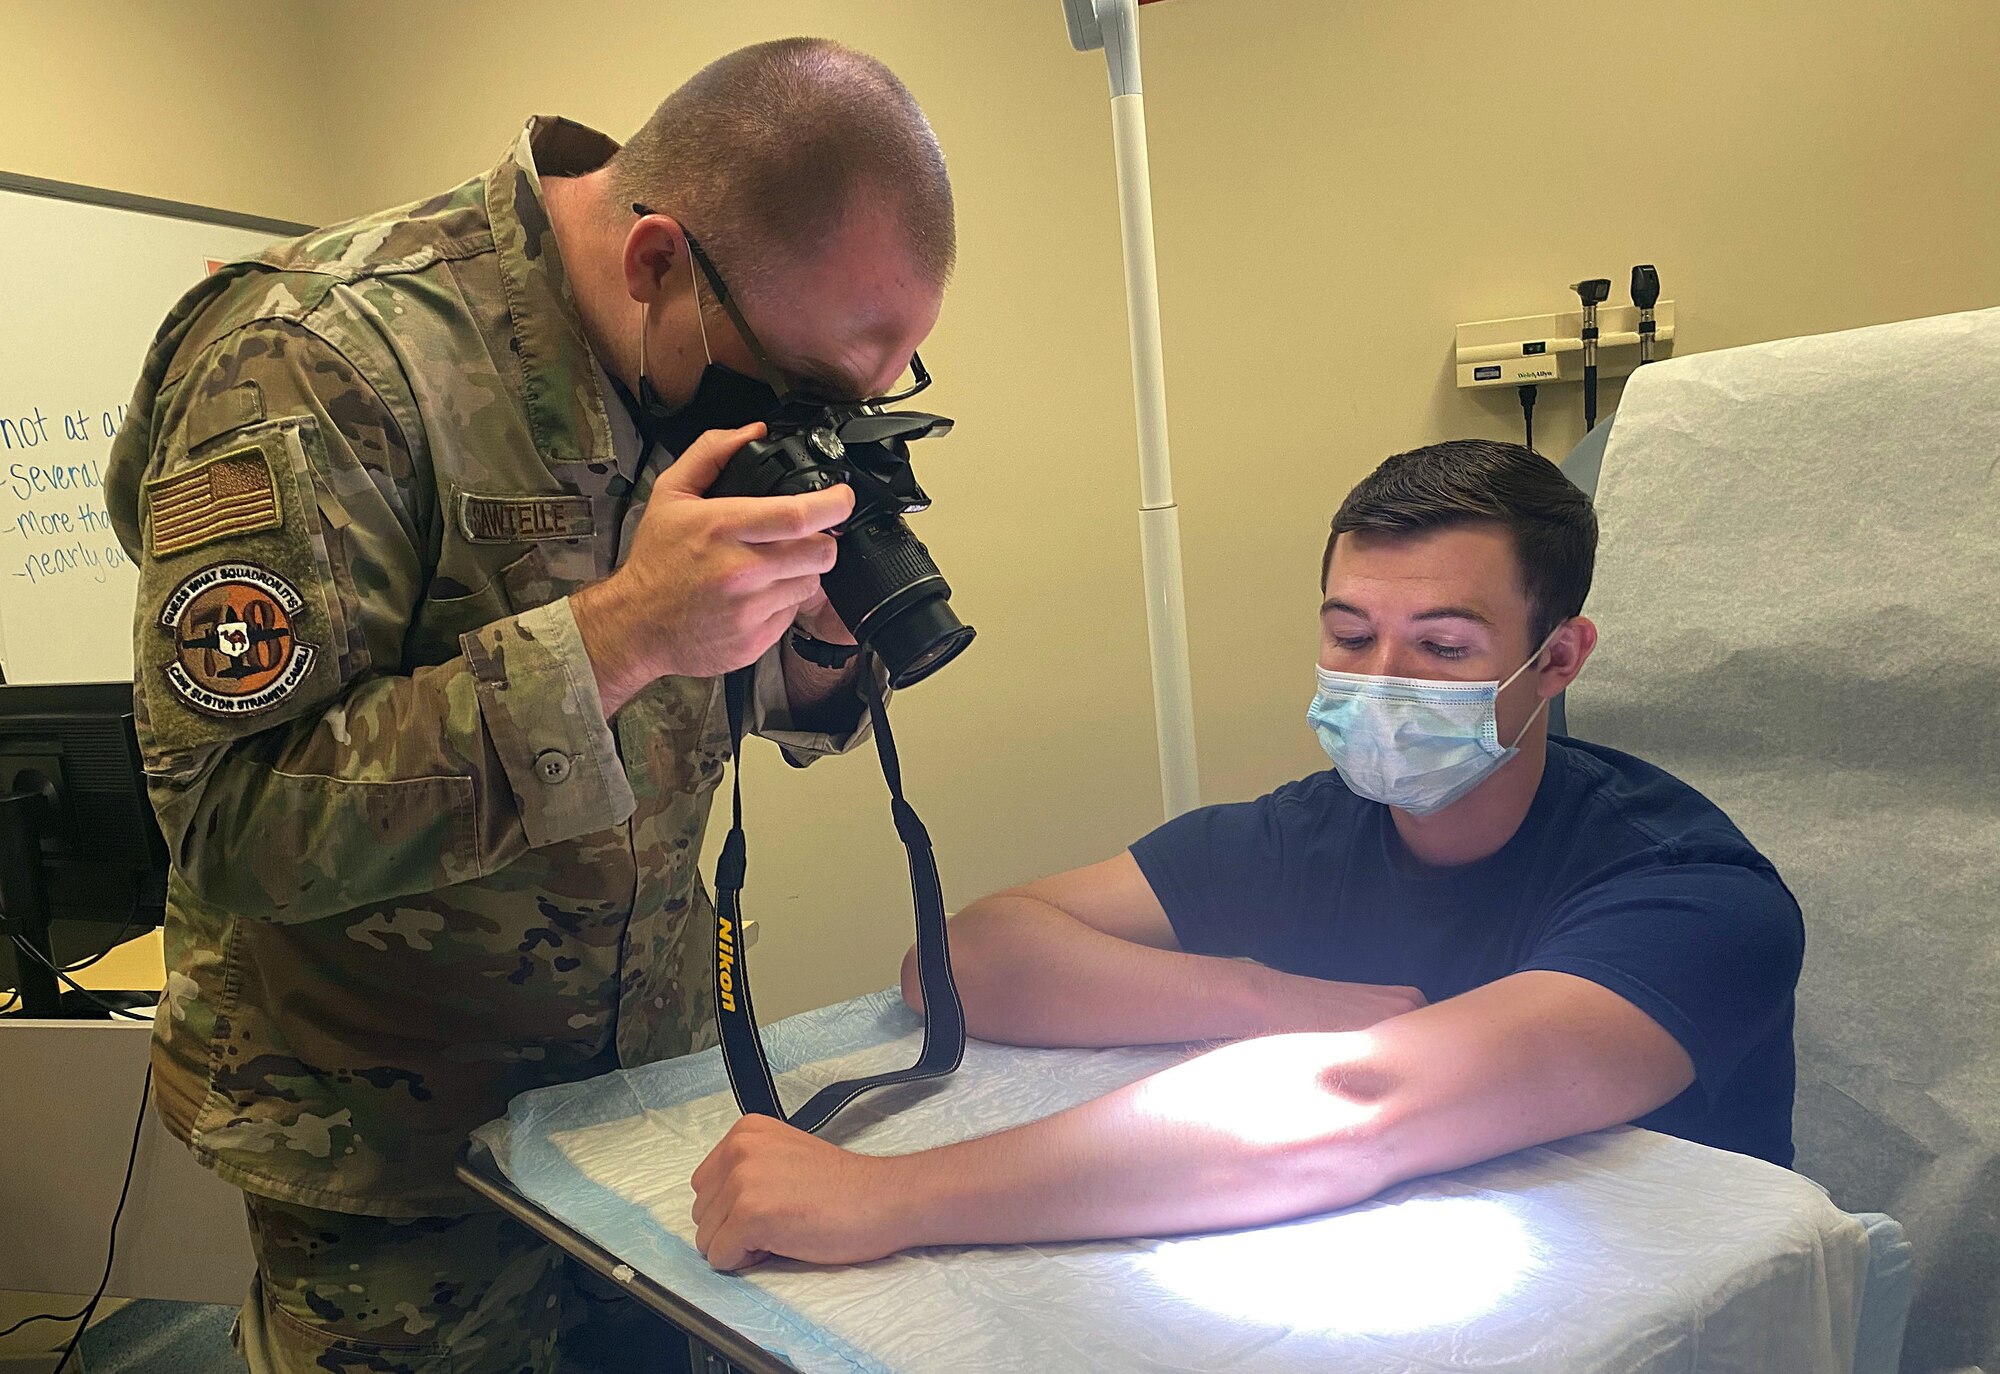 Photo shows a picture of an Airman taking the picture of a patient's arm.